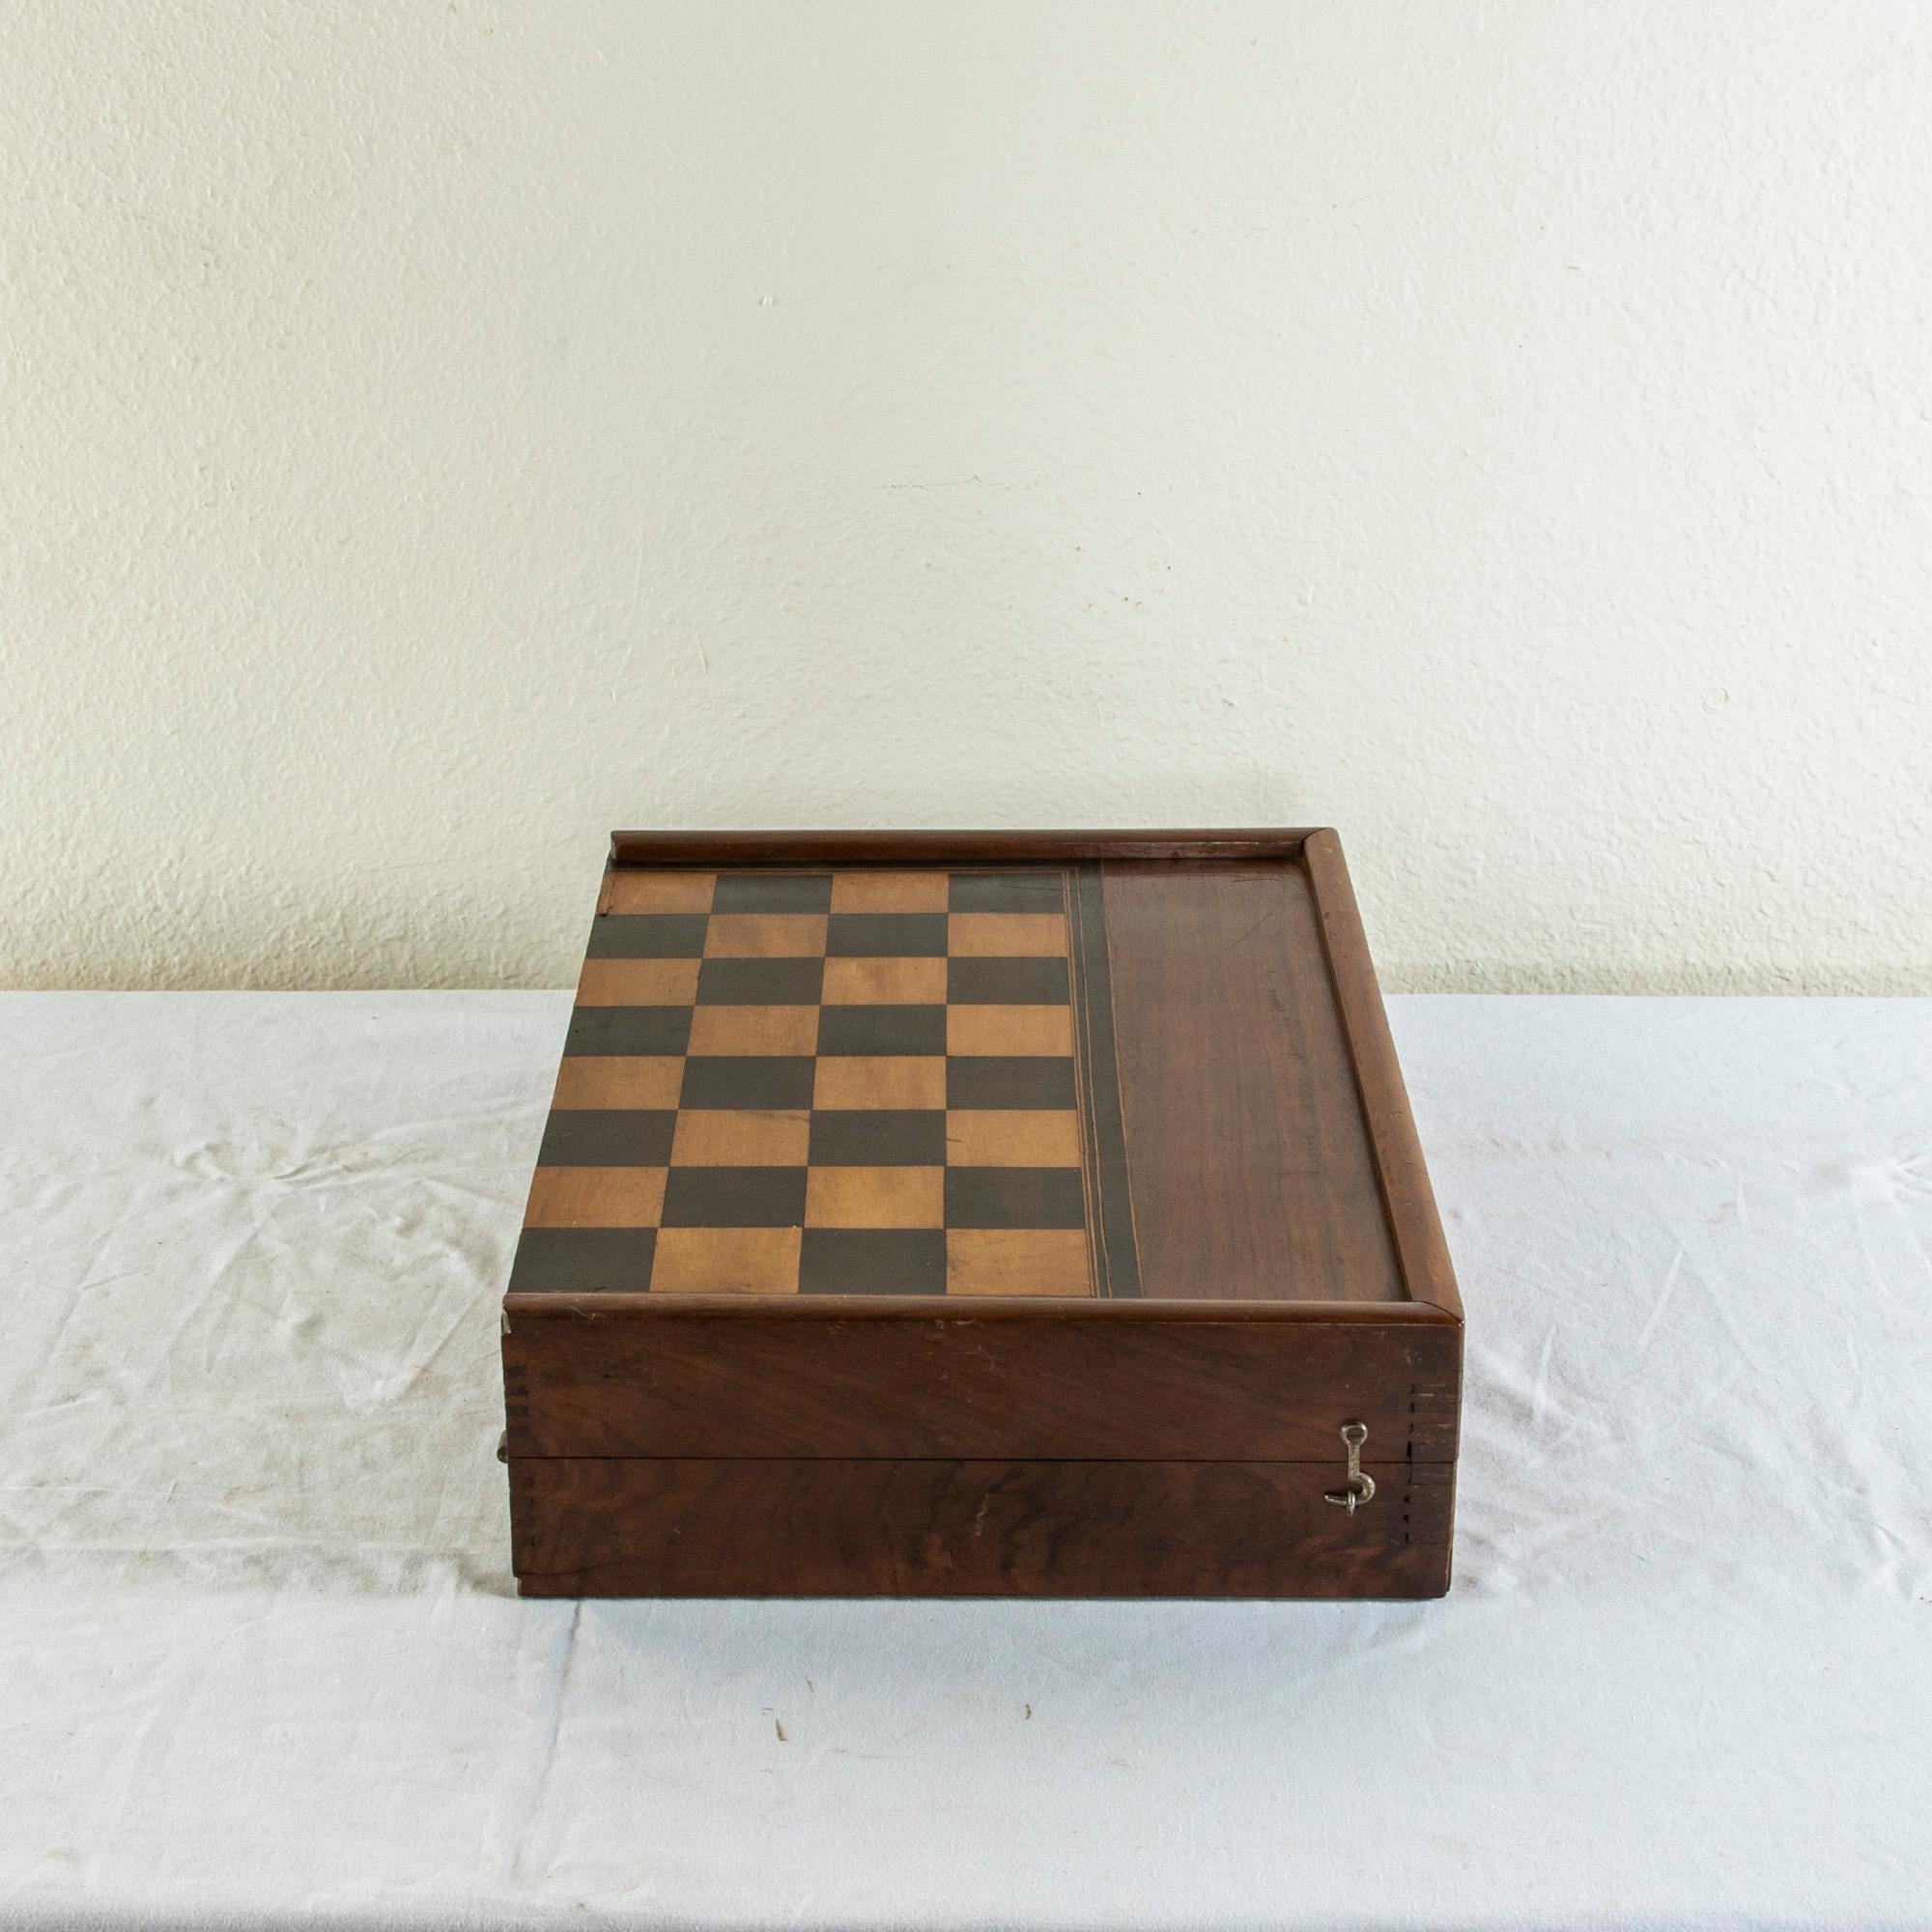 19th Century, Walnut Marquetry Folding Game Box for Chess, Checkers, Backgammon 1